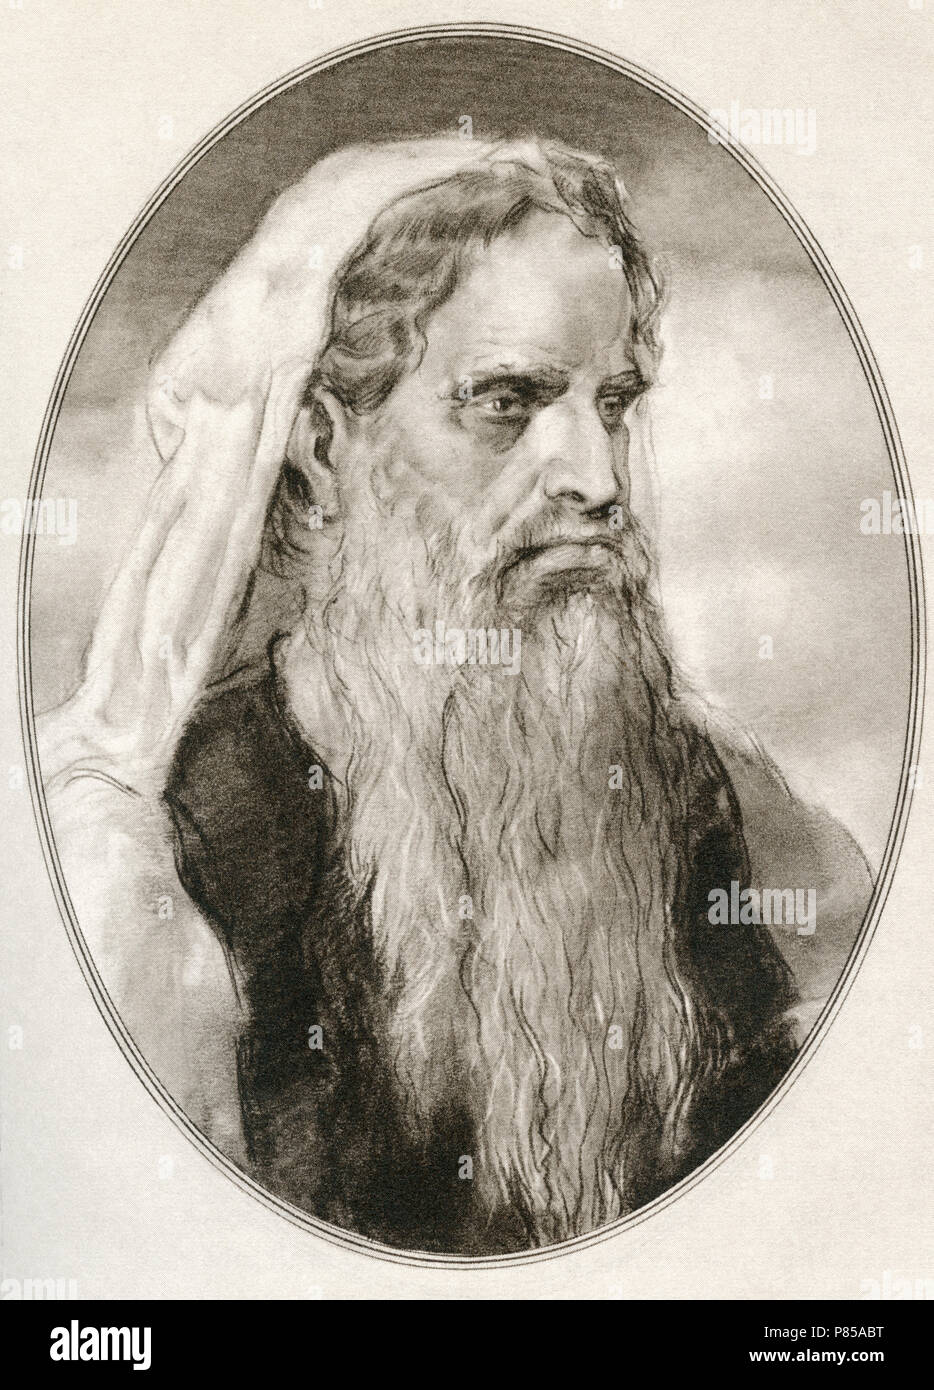 Moses, a prophet in the Abrahamic religions, leader of the Israelites and lawgiver.  Illustration by Gordon Ross, American artist and illustrator (1873-1946), from Living Biographies of Religious Leaders. Stock Photo